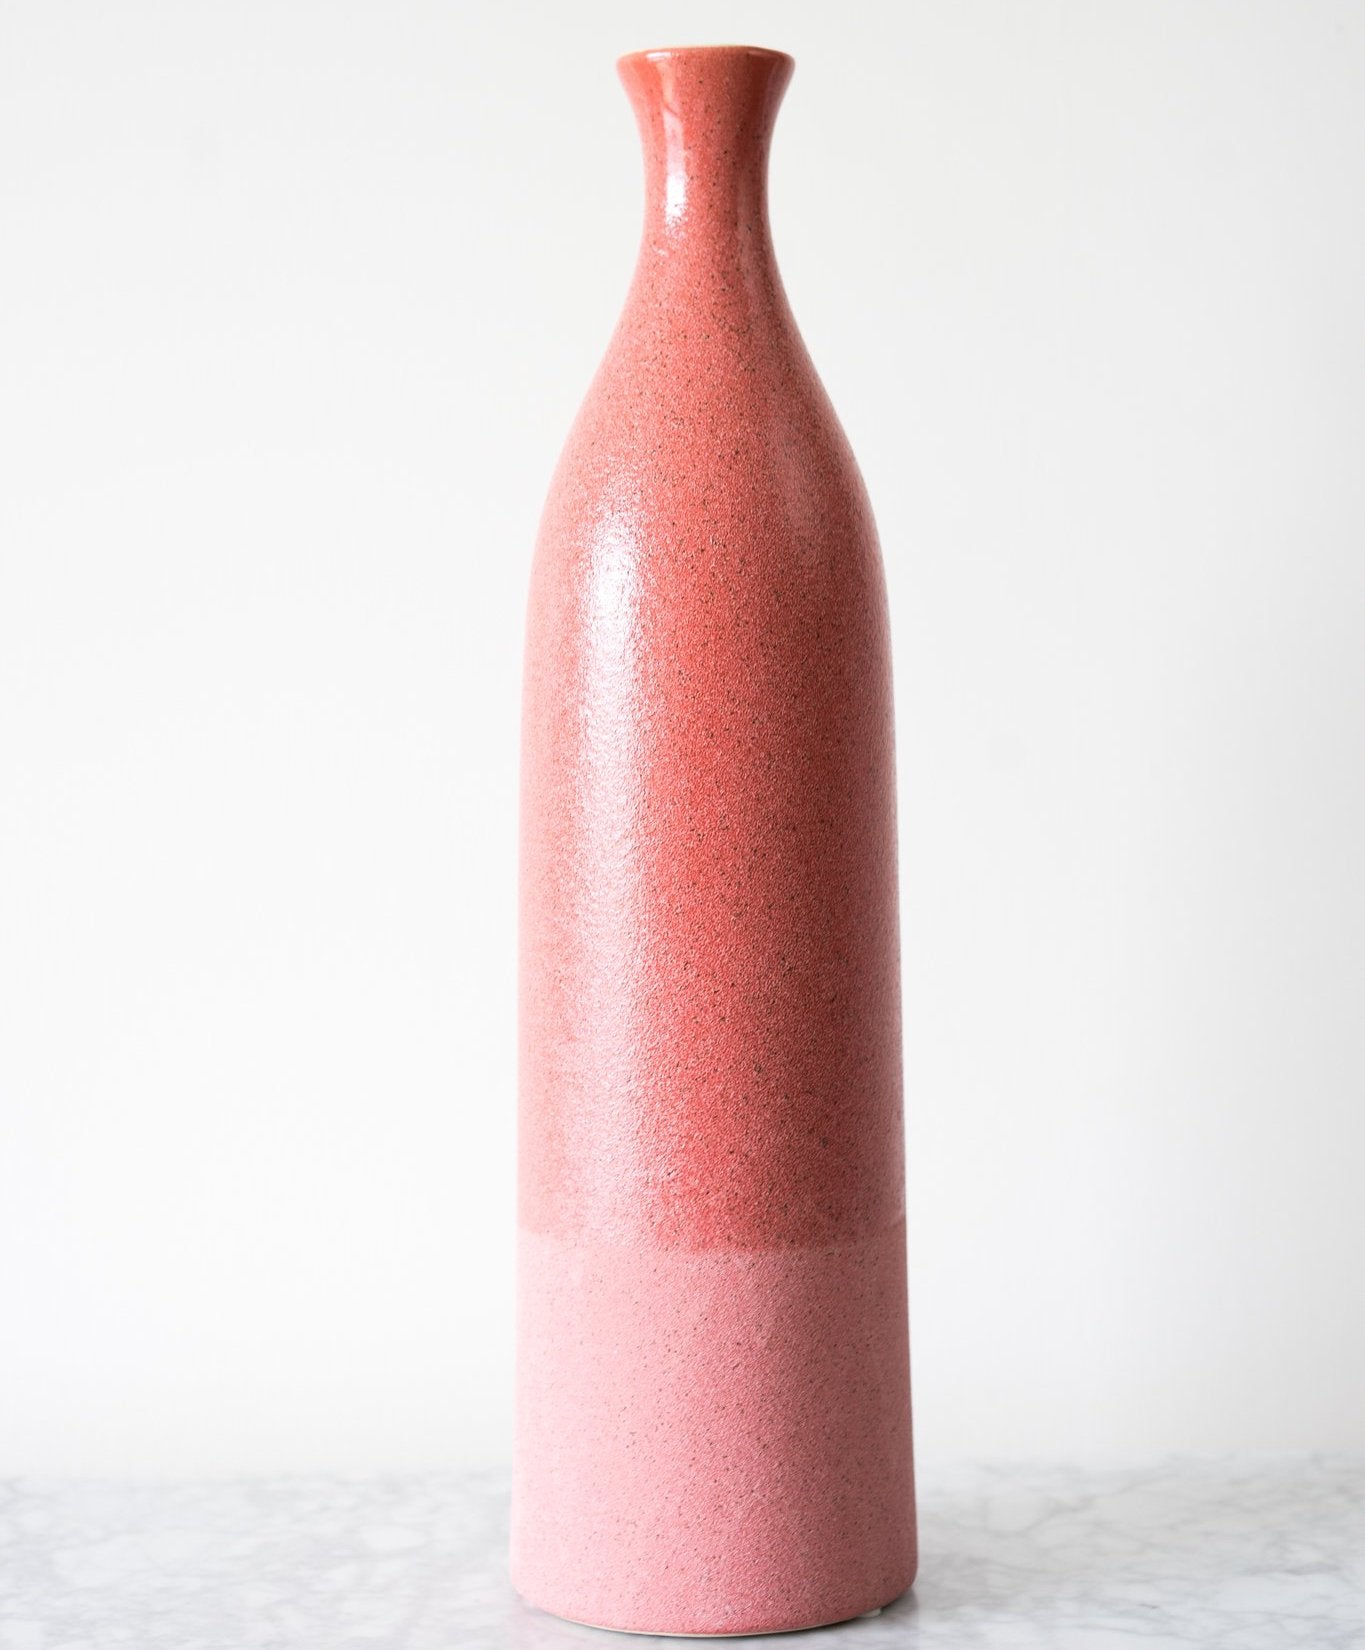 our Dual Texture Ceramic Vase has a smooth color glazed upper body and a matte glazed lower body.